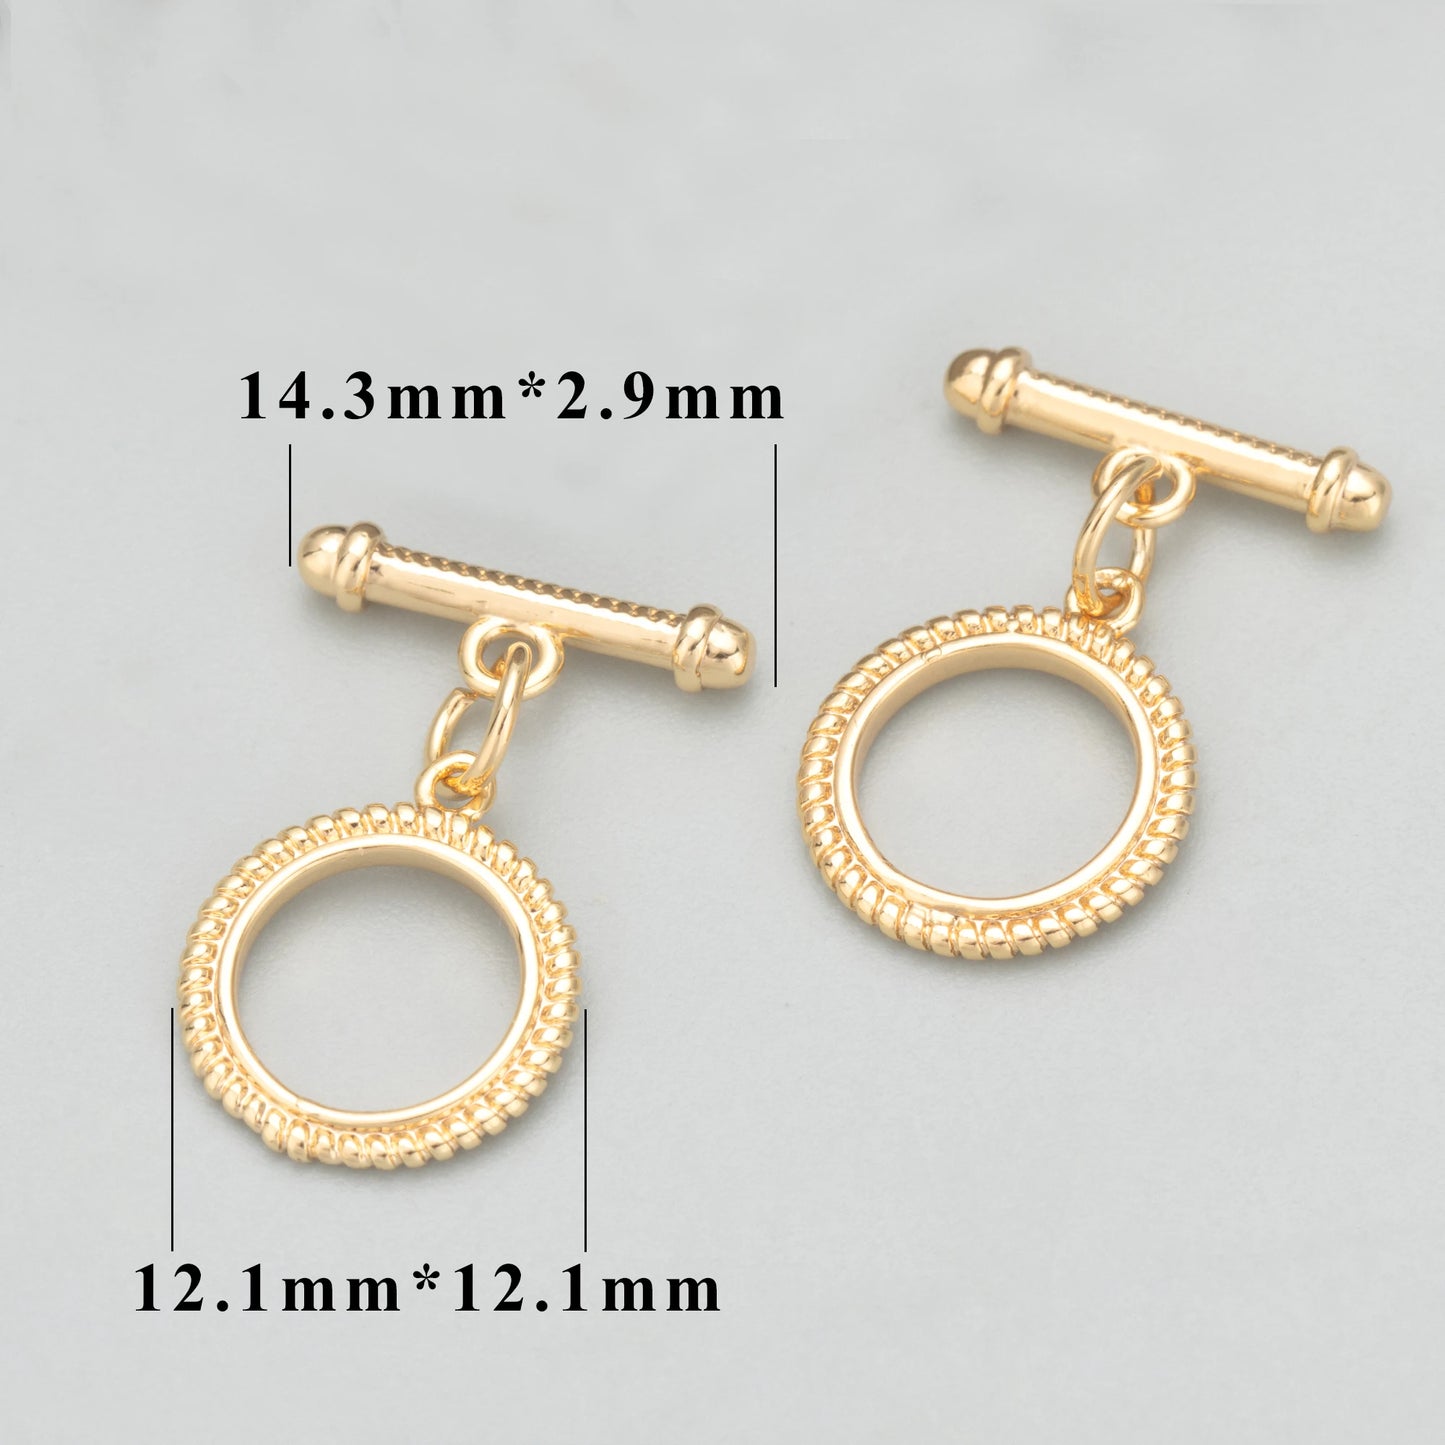 GUFEATHER MD10,jewelry accessories,18k gold rhodium plated,nickel free,copper,jewelry making,ot clasp,connector hooks,6pcs/lot